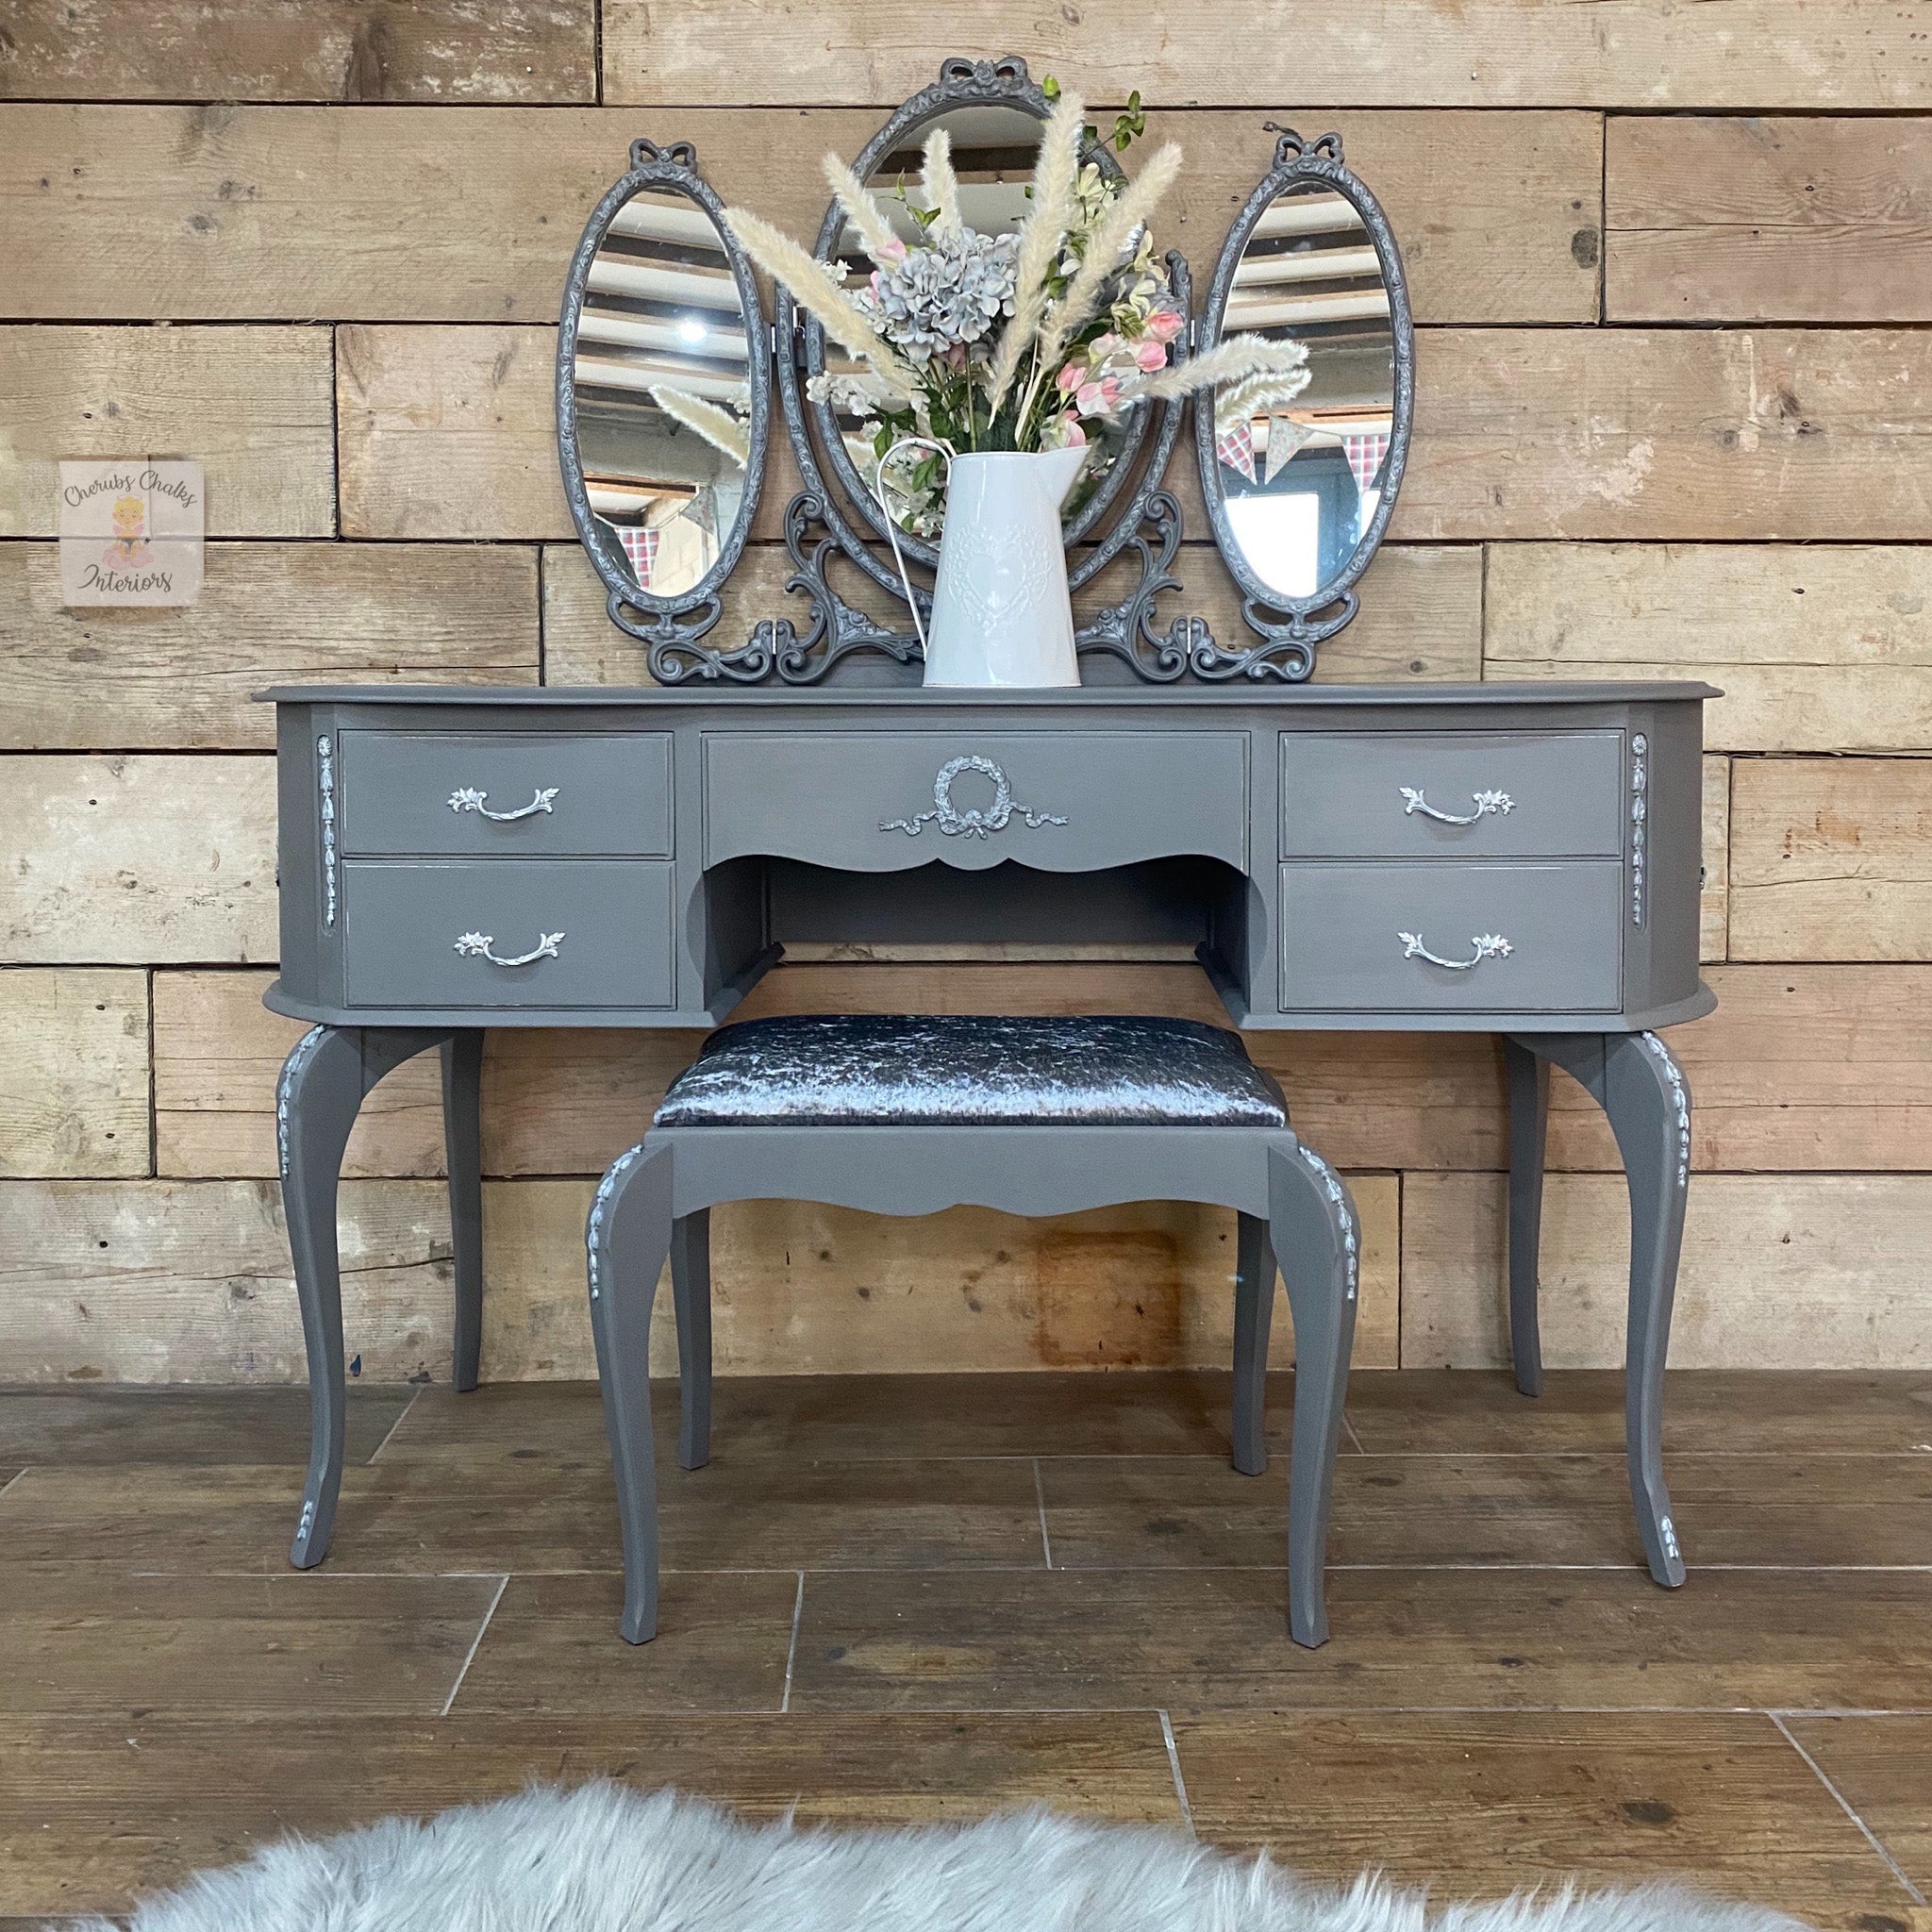 A vintage vanity desk, stool, and tri-fold mirror refurbished by Cherbs Chalks Interiors are painted in Dixie Belle's Hurricane Gray chalk mineral paint.